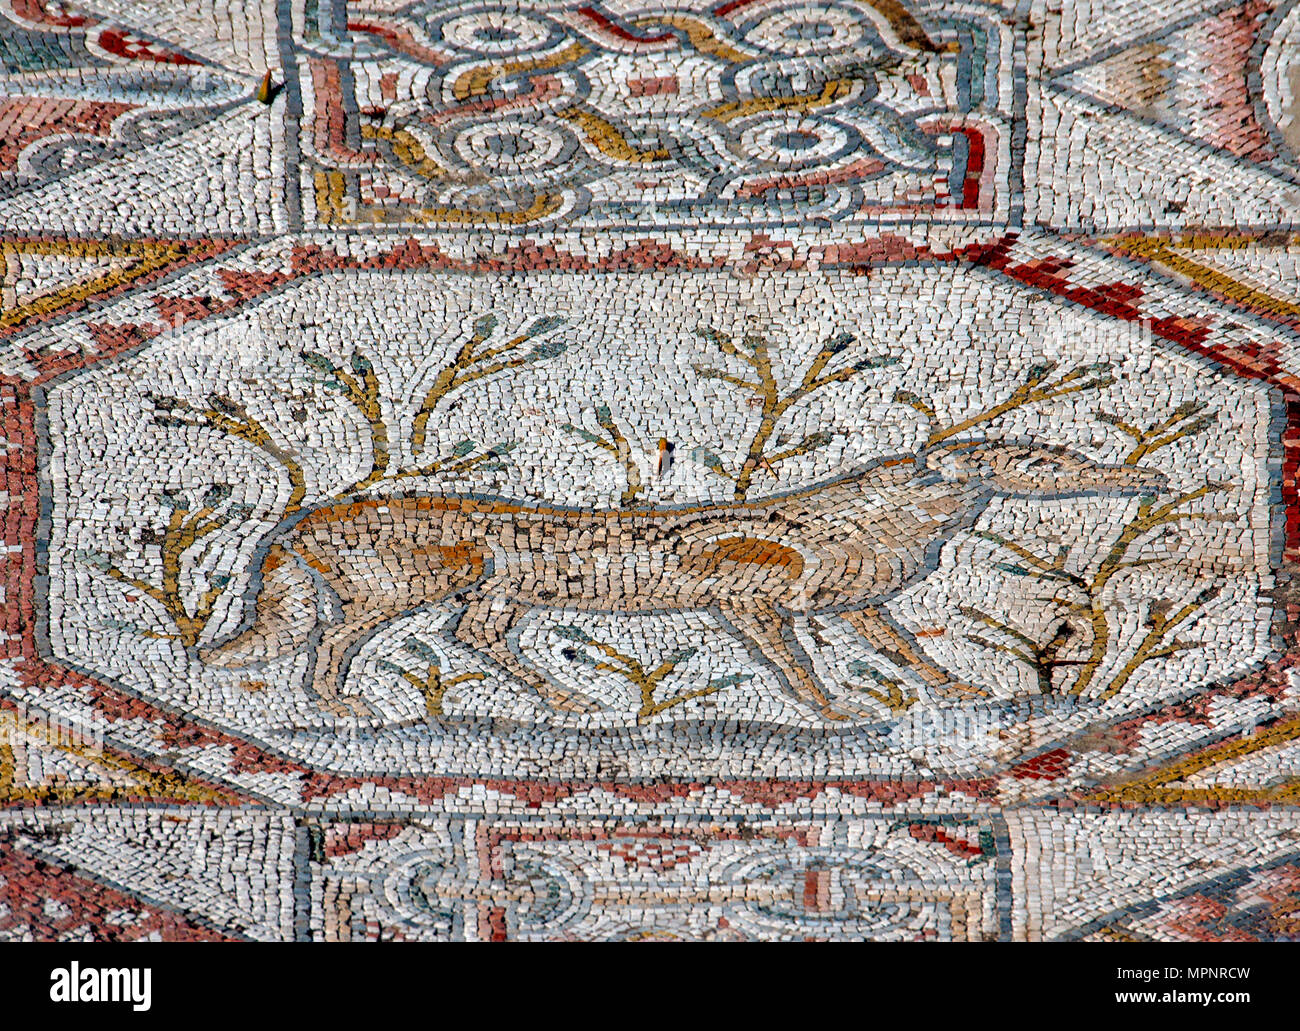 Segment of a mosaic floor of a monastery in bet guvrin, Israel, 6th century CE. depicting a hunting scene. From the Eretz Israel Museum AKA Haartz Mus Stock Photo